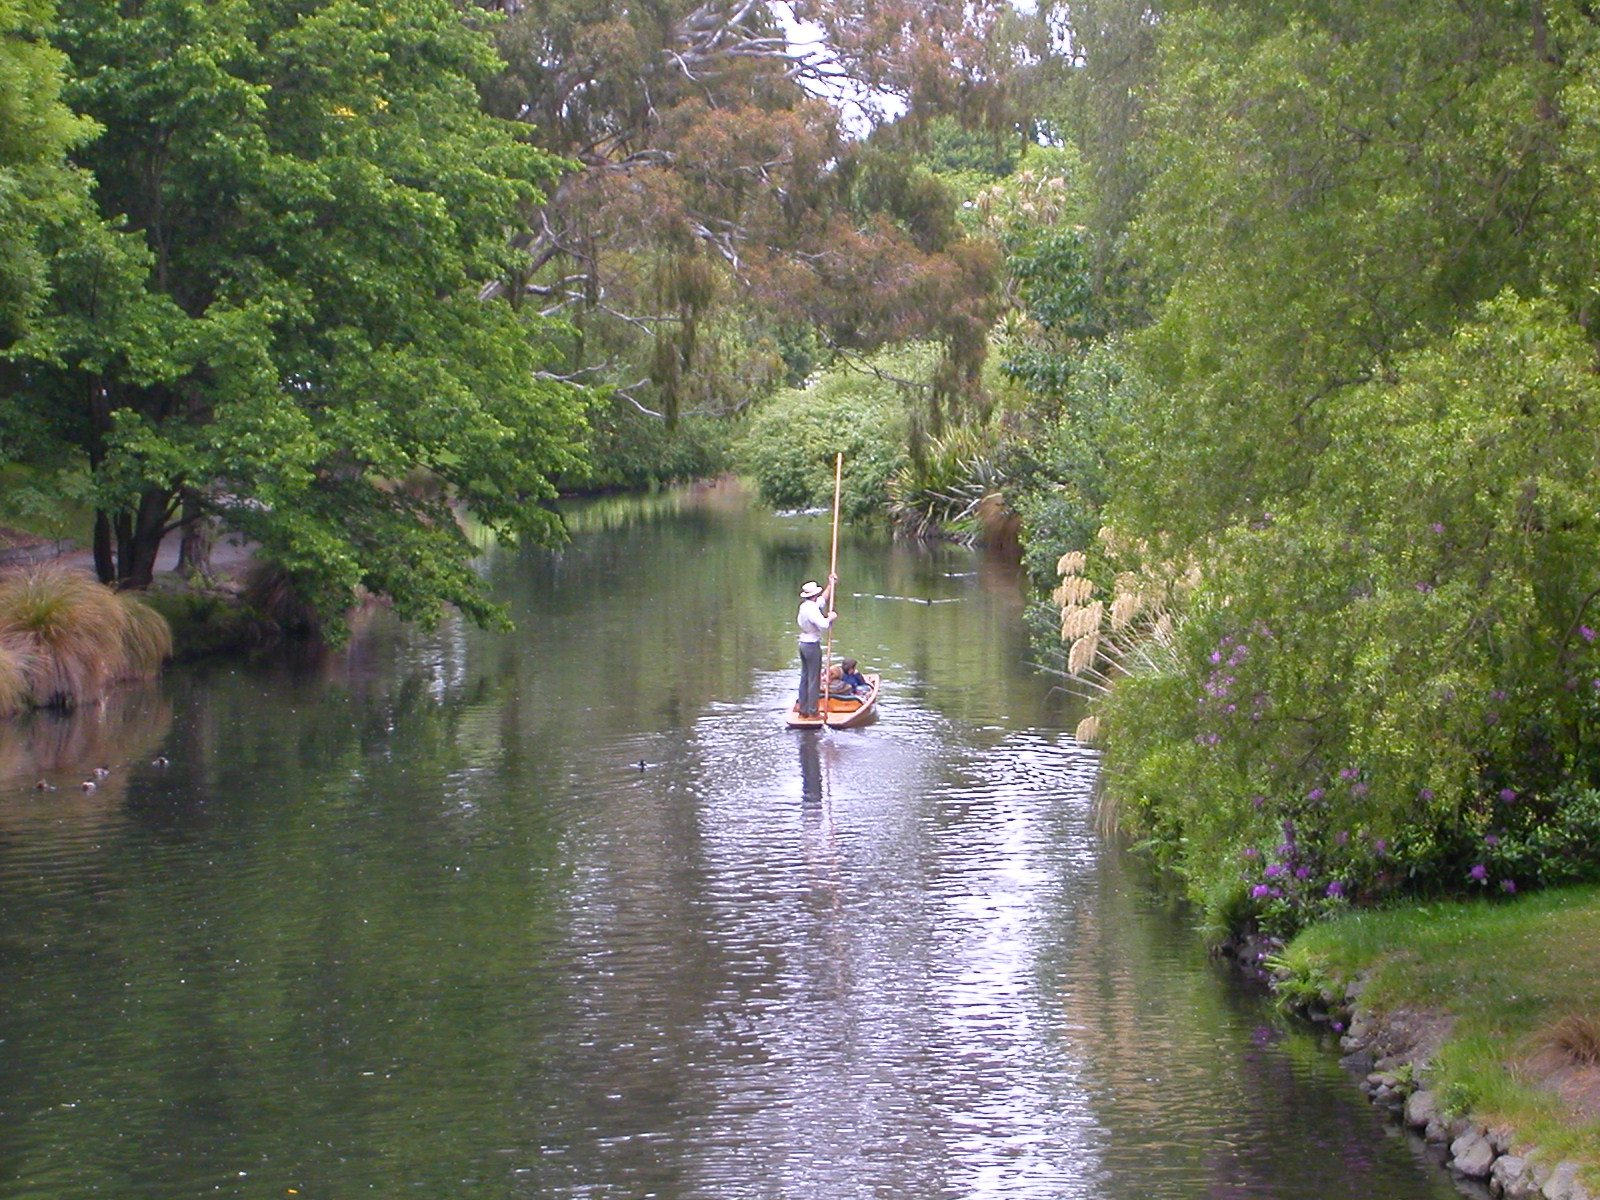 New Zealand, punting on Avon, Christchurch